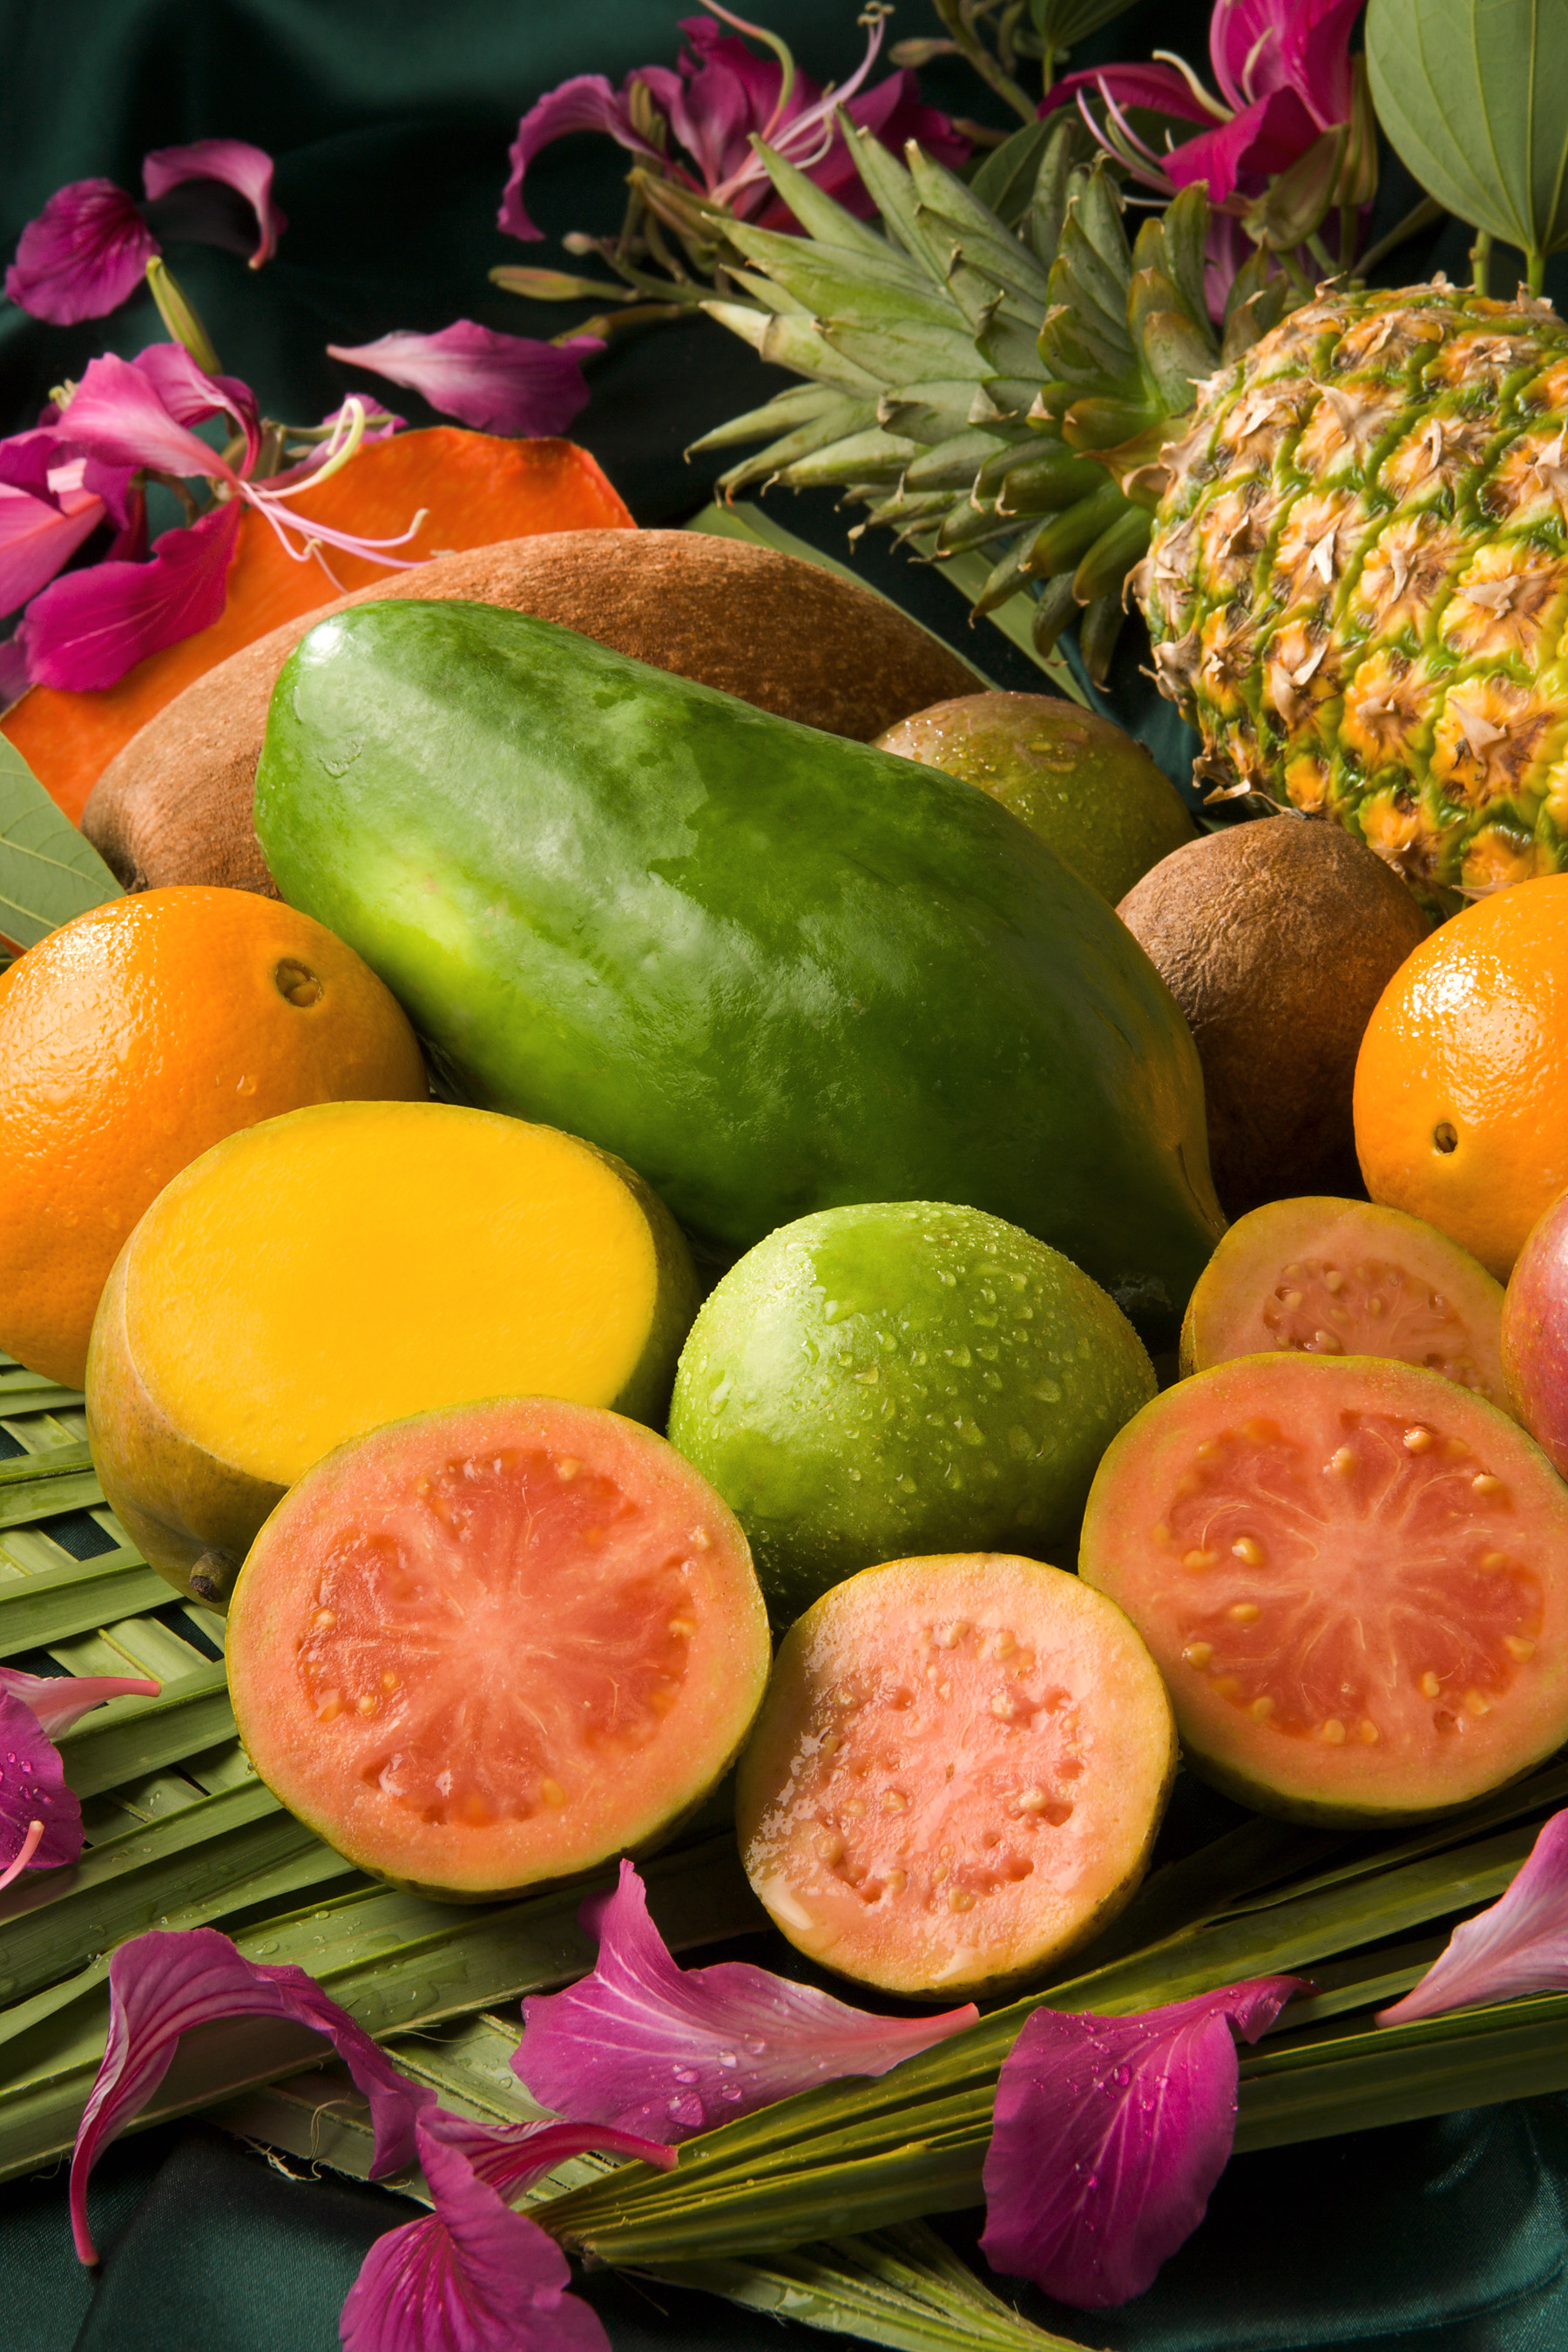 File:ARS tropical fruit no labels.jpg - Wikimedia Commons